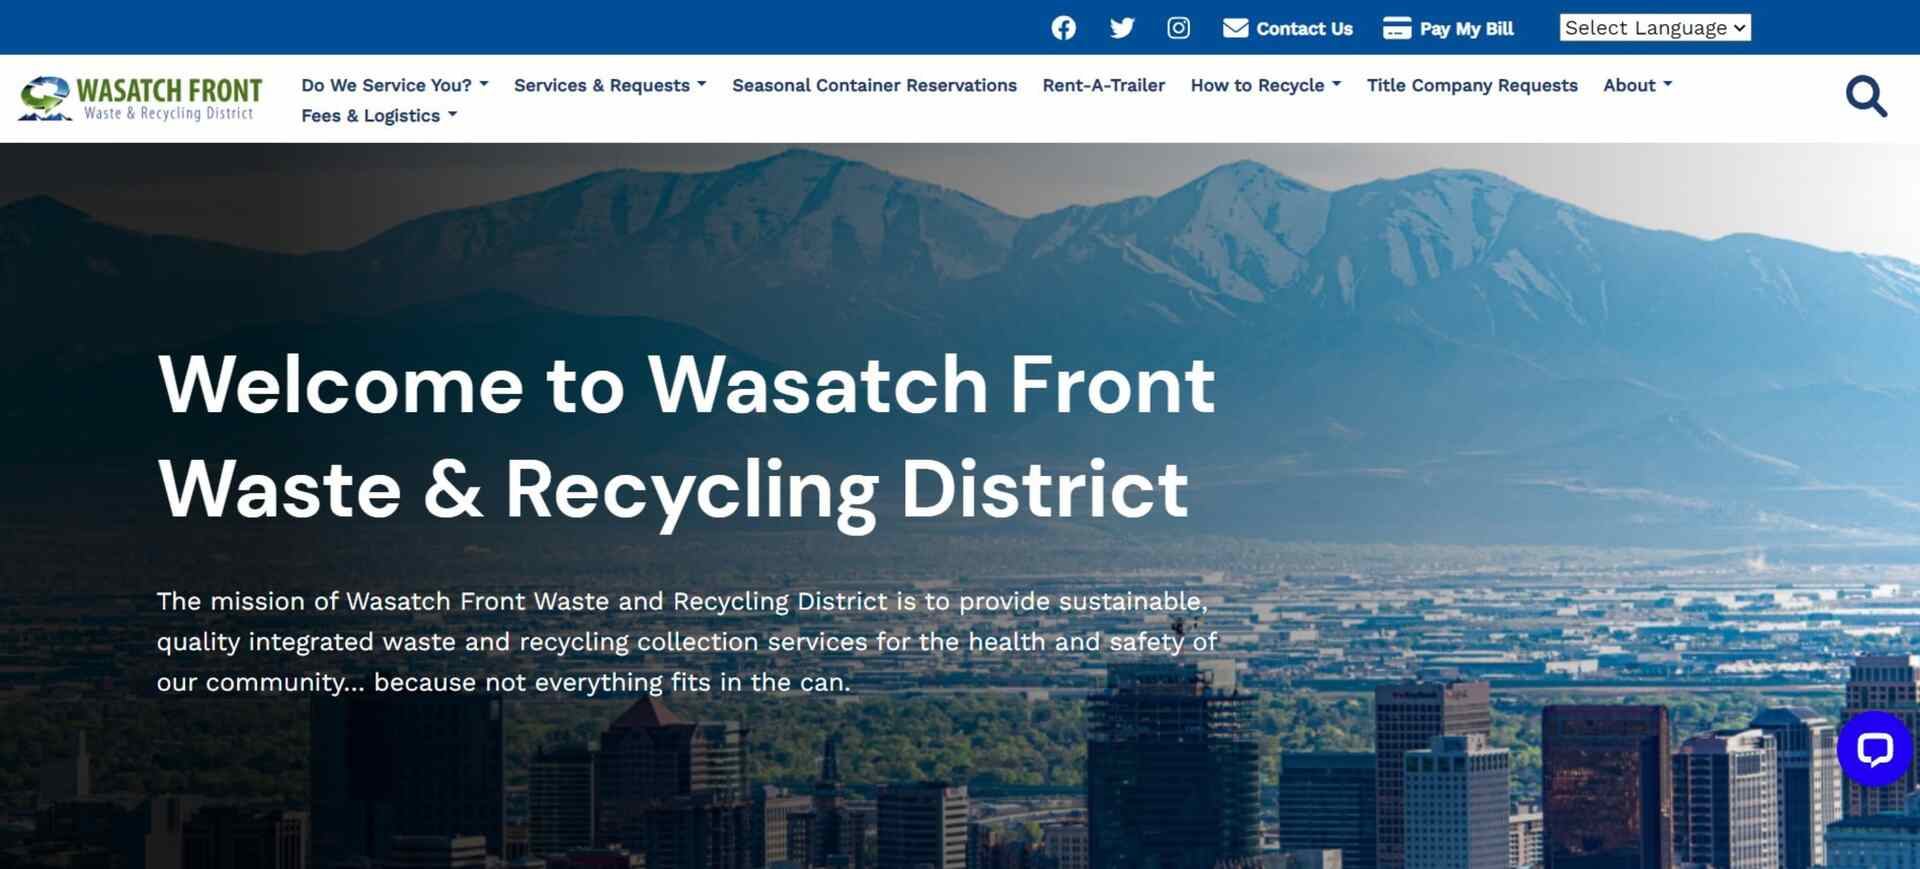 Wasatch Front Waste & Recycling District